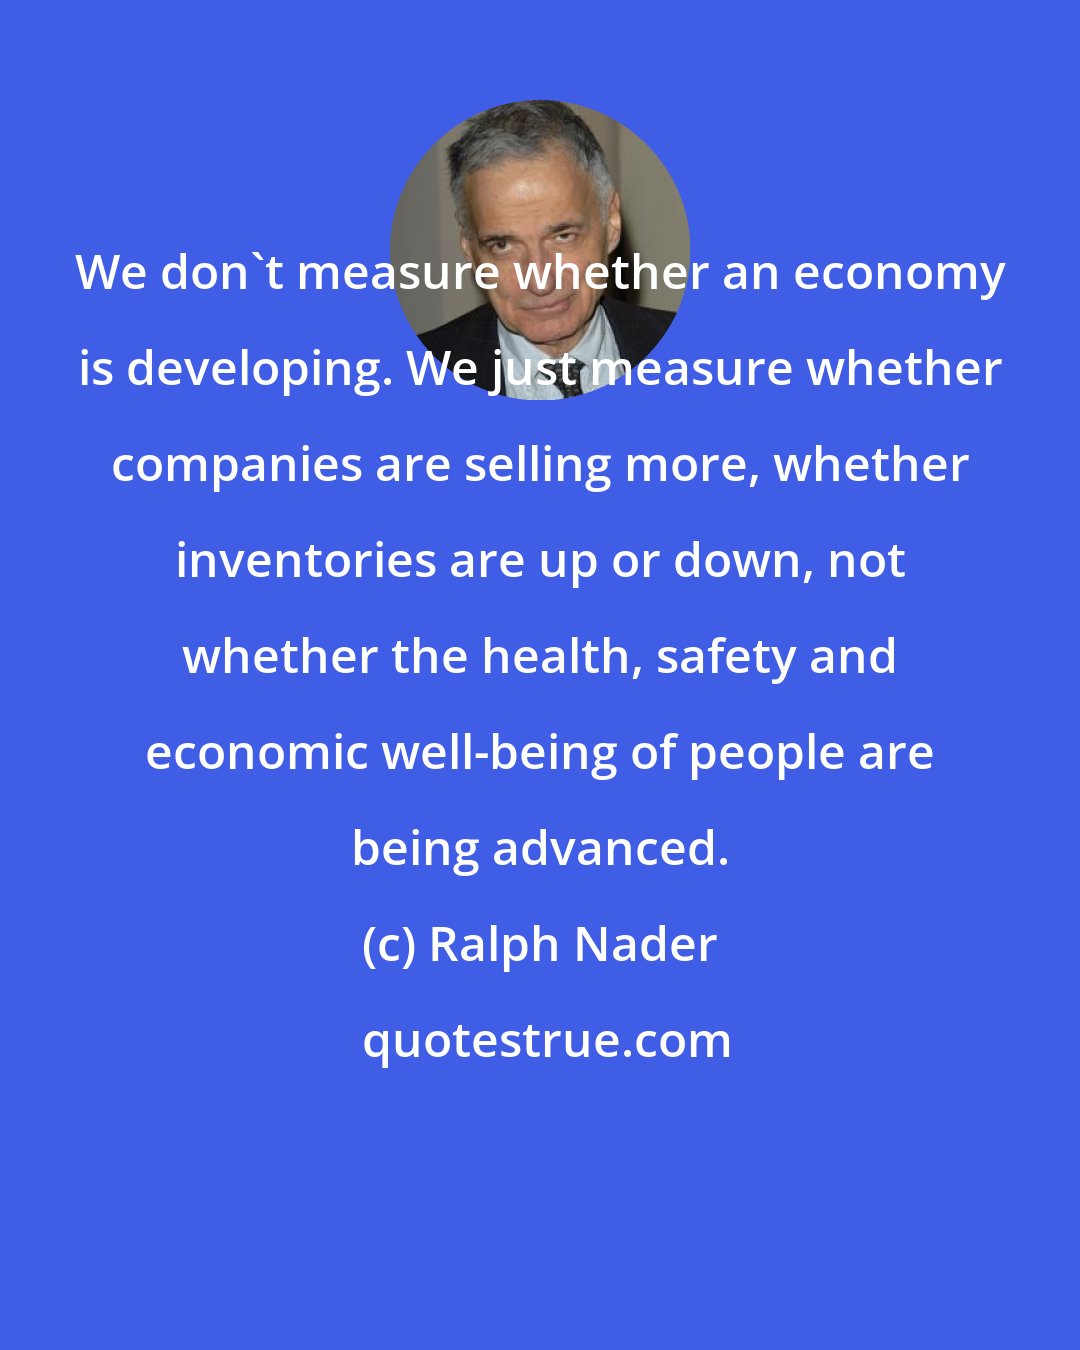 Ralph Nader: We don't measure whether an economy is developing. We just measure whether companies are selling more, whether inventories are up or down, not whether the health, safety and economic well-being of people are being advanced.